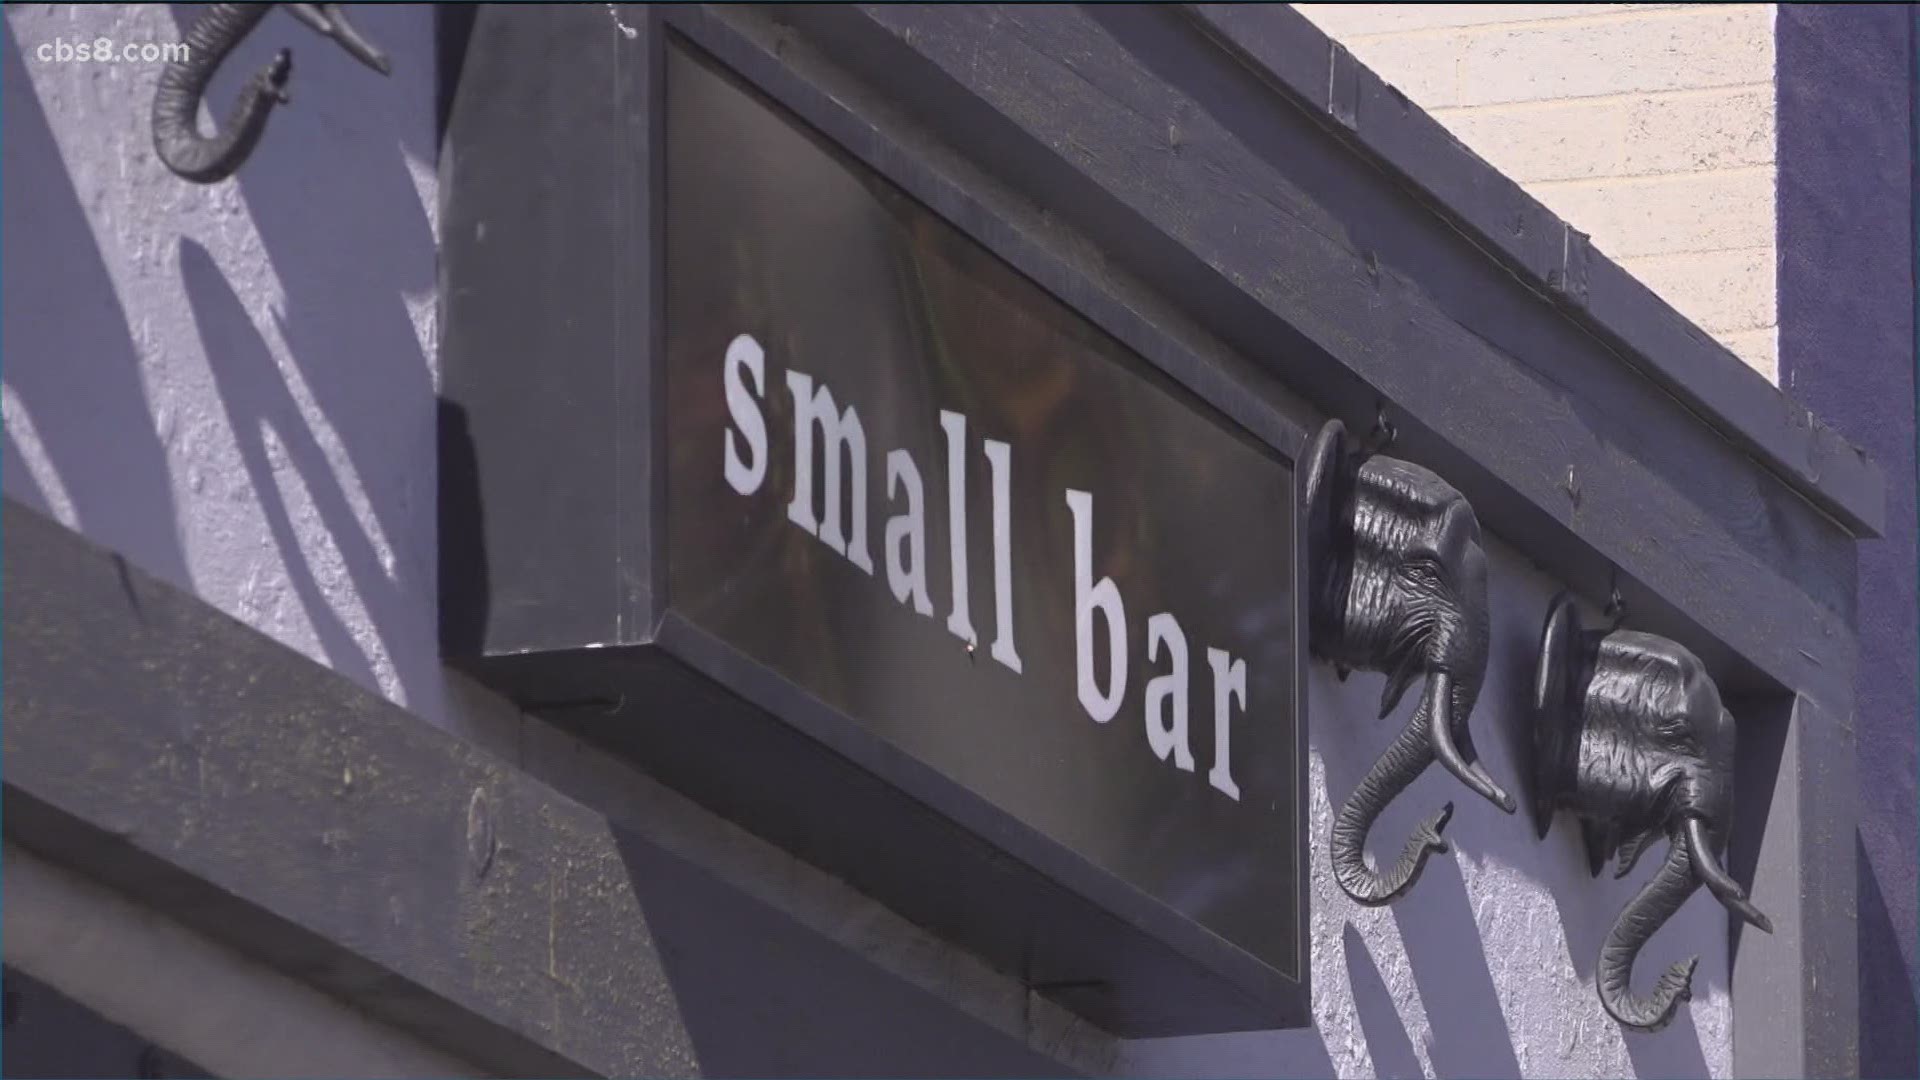 Small Bar now joins the growing list of local bars and restaurants that have closed in 2020.